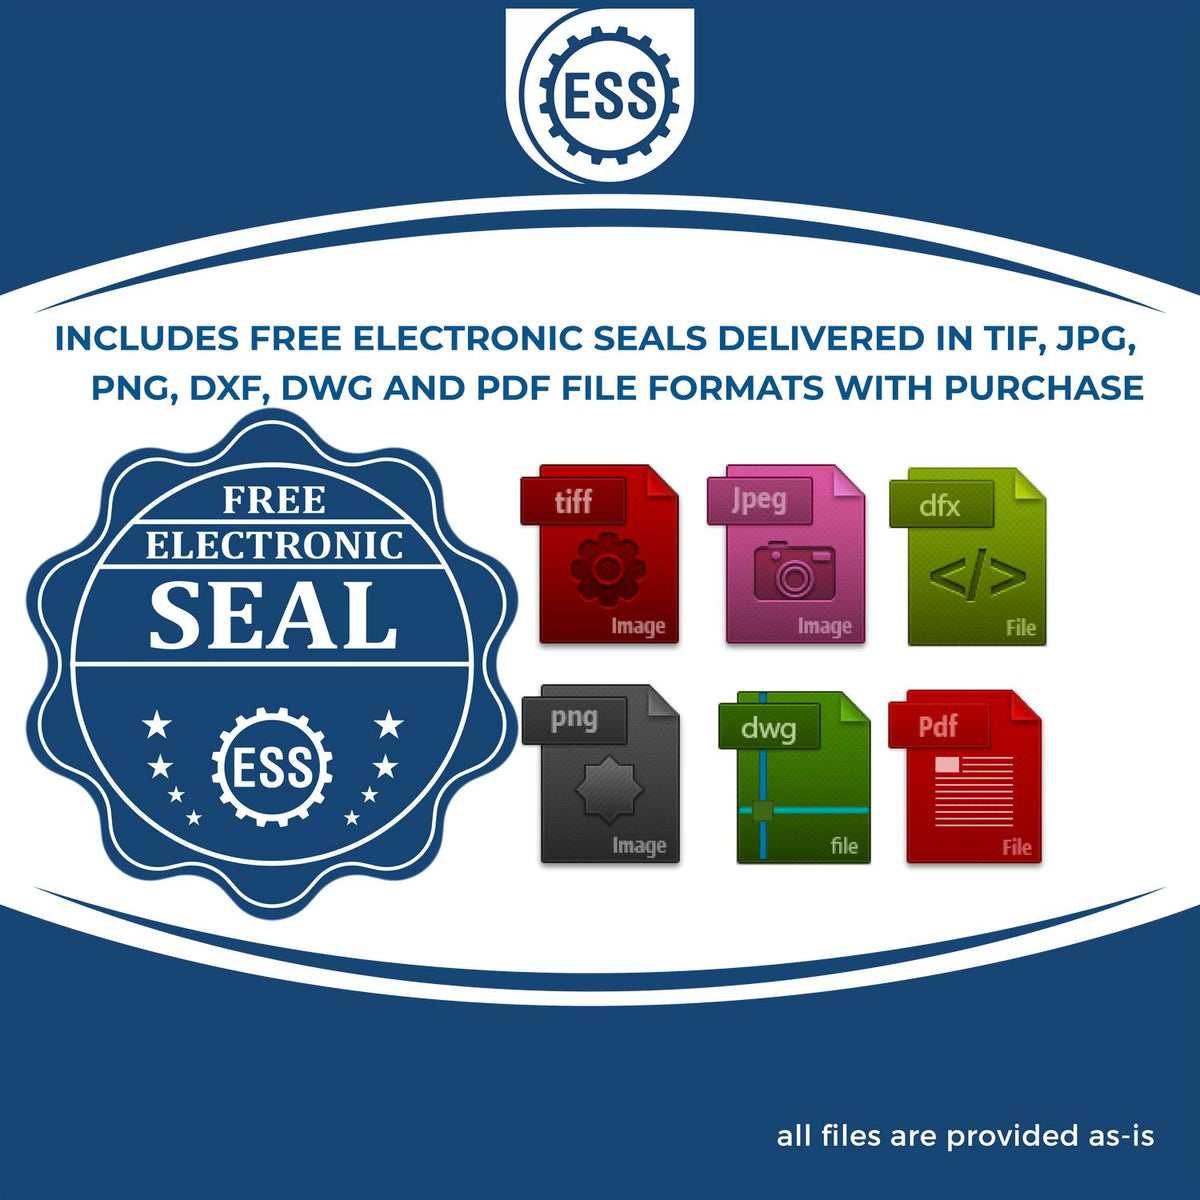 An infographic for the free electronic seal for the Utah Engineer Desk Seal illustrating the different file type icons such as DXF, DWG, TIF, JPG and PNG.